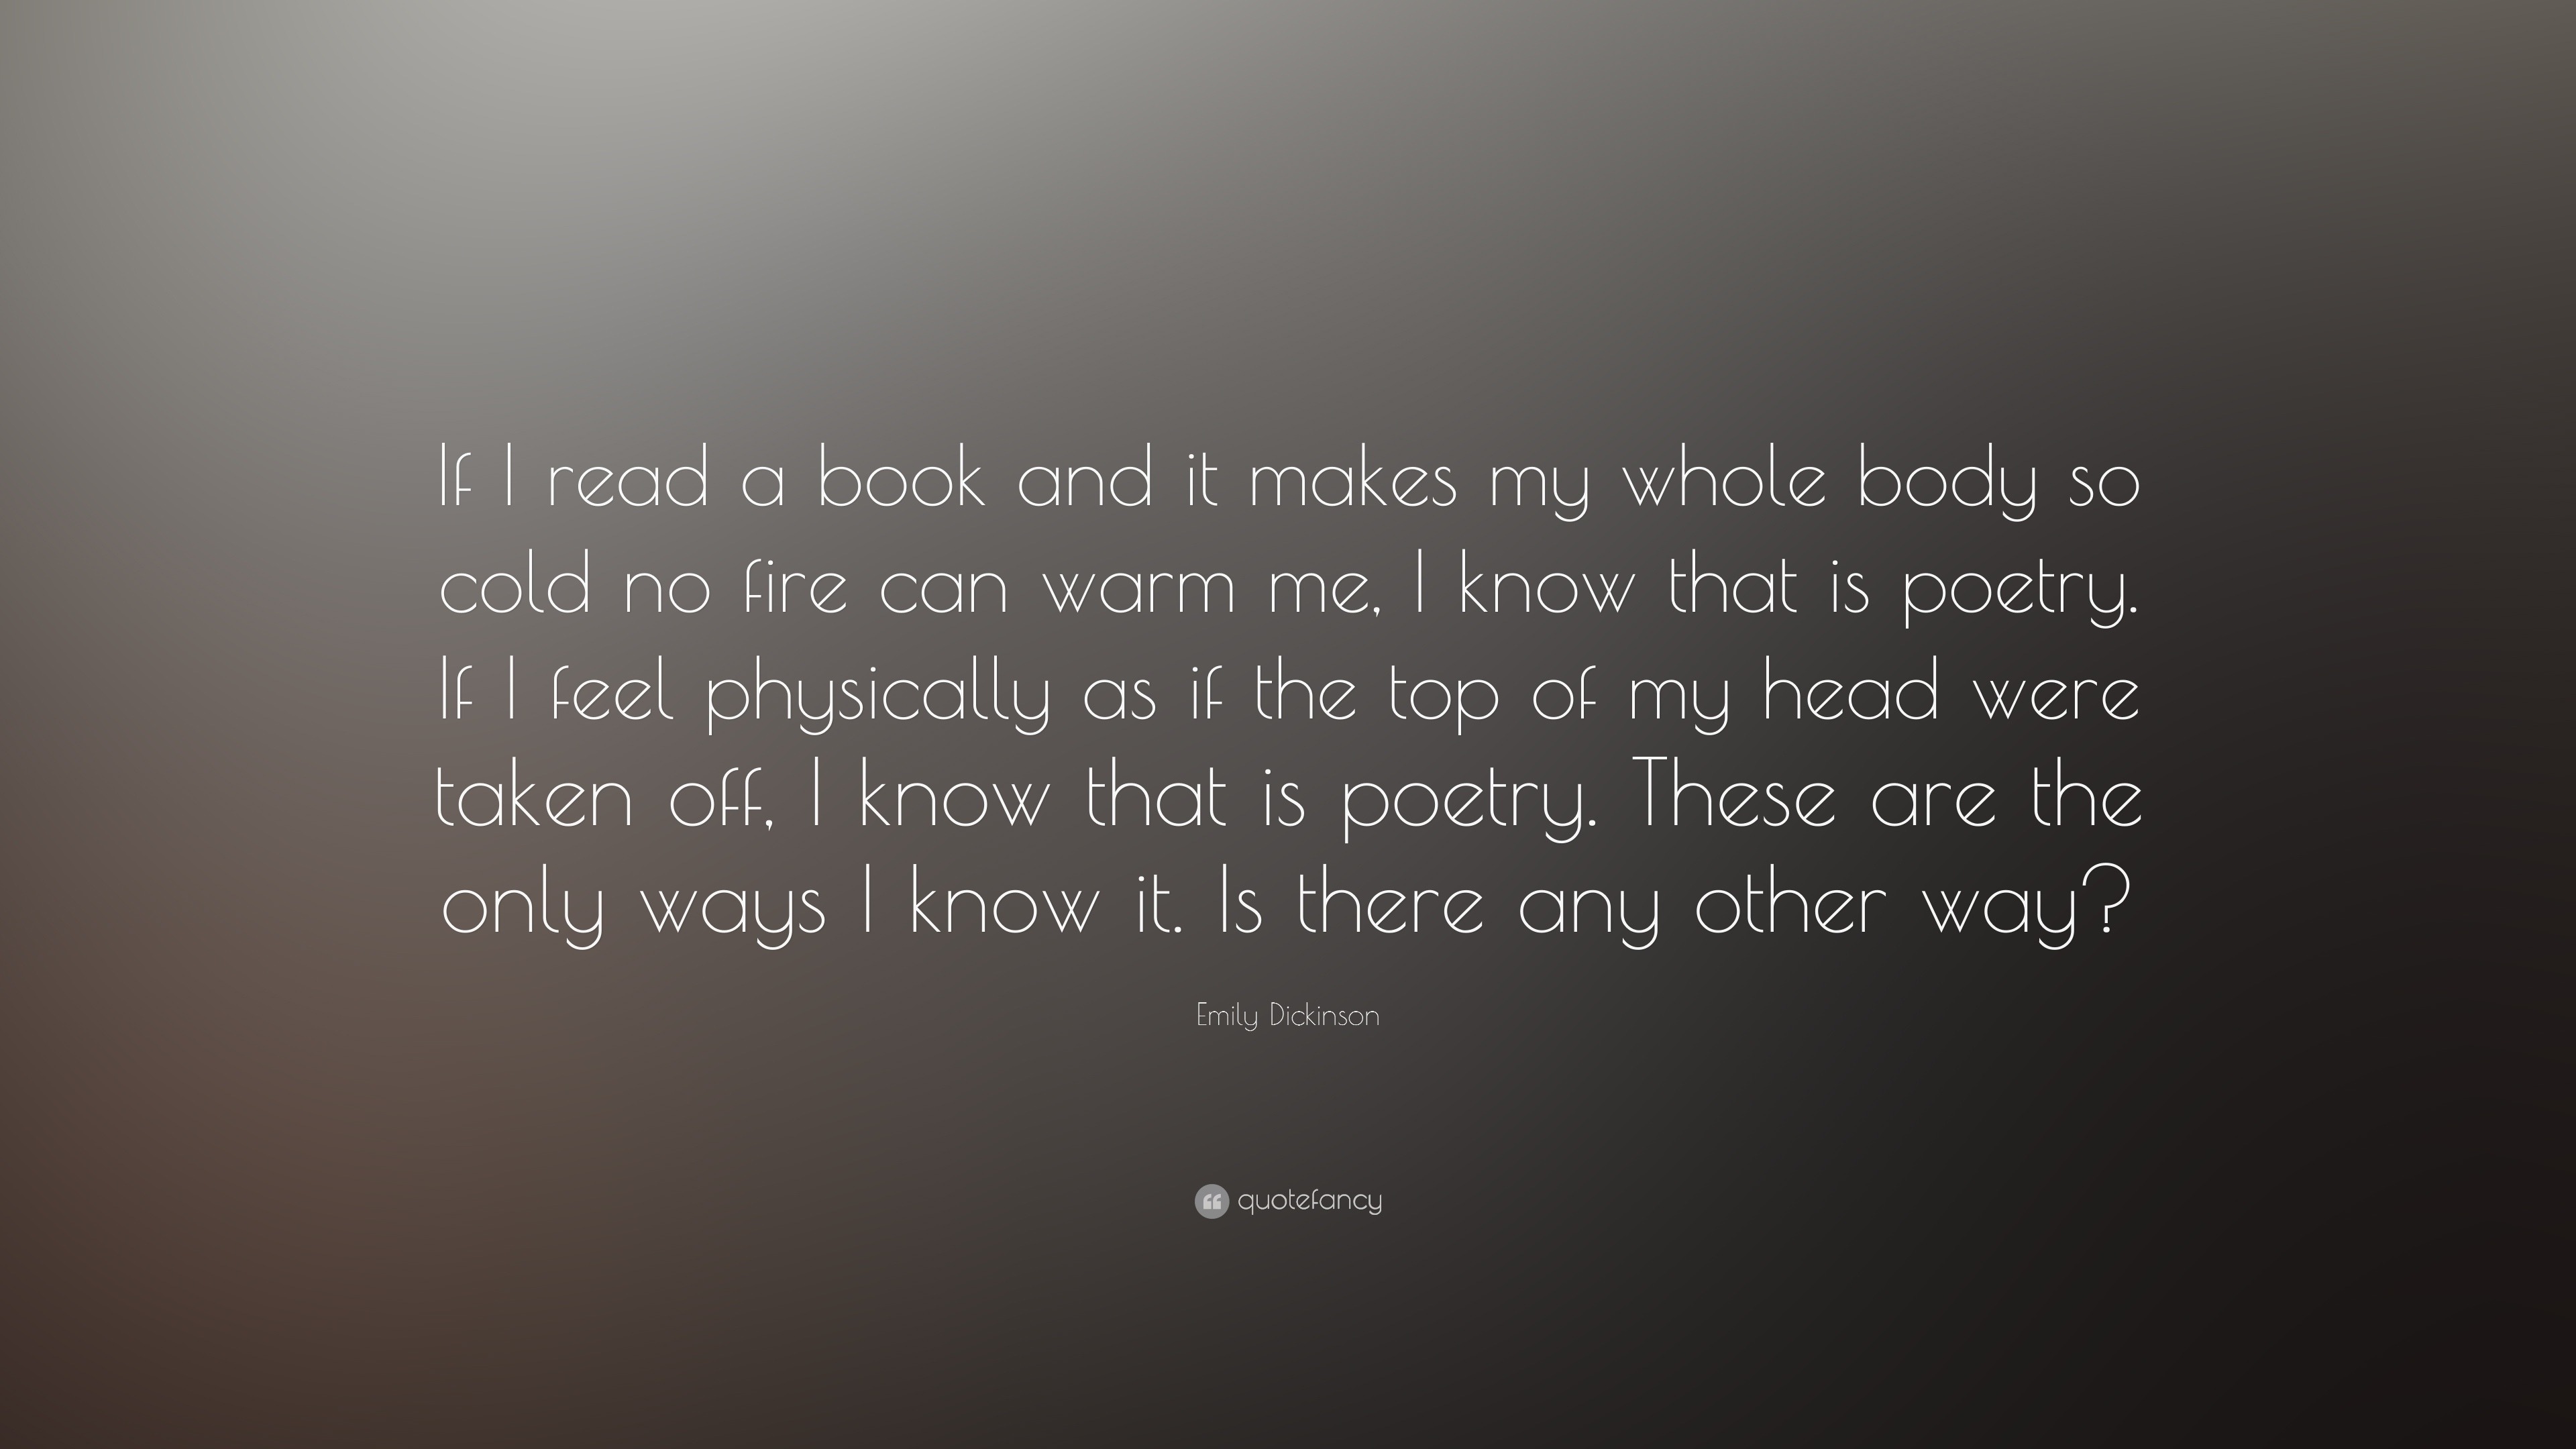 Emily Dickinson Quote: “If I read a book and it makes my whole body so cold no fire ...3840 x 2160